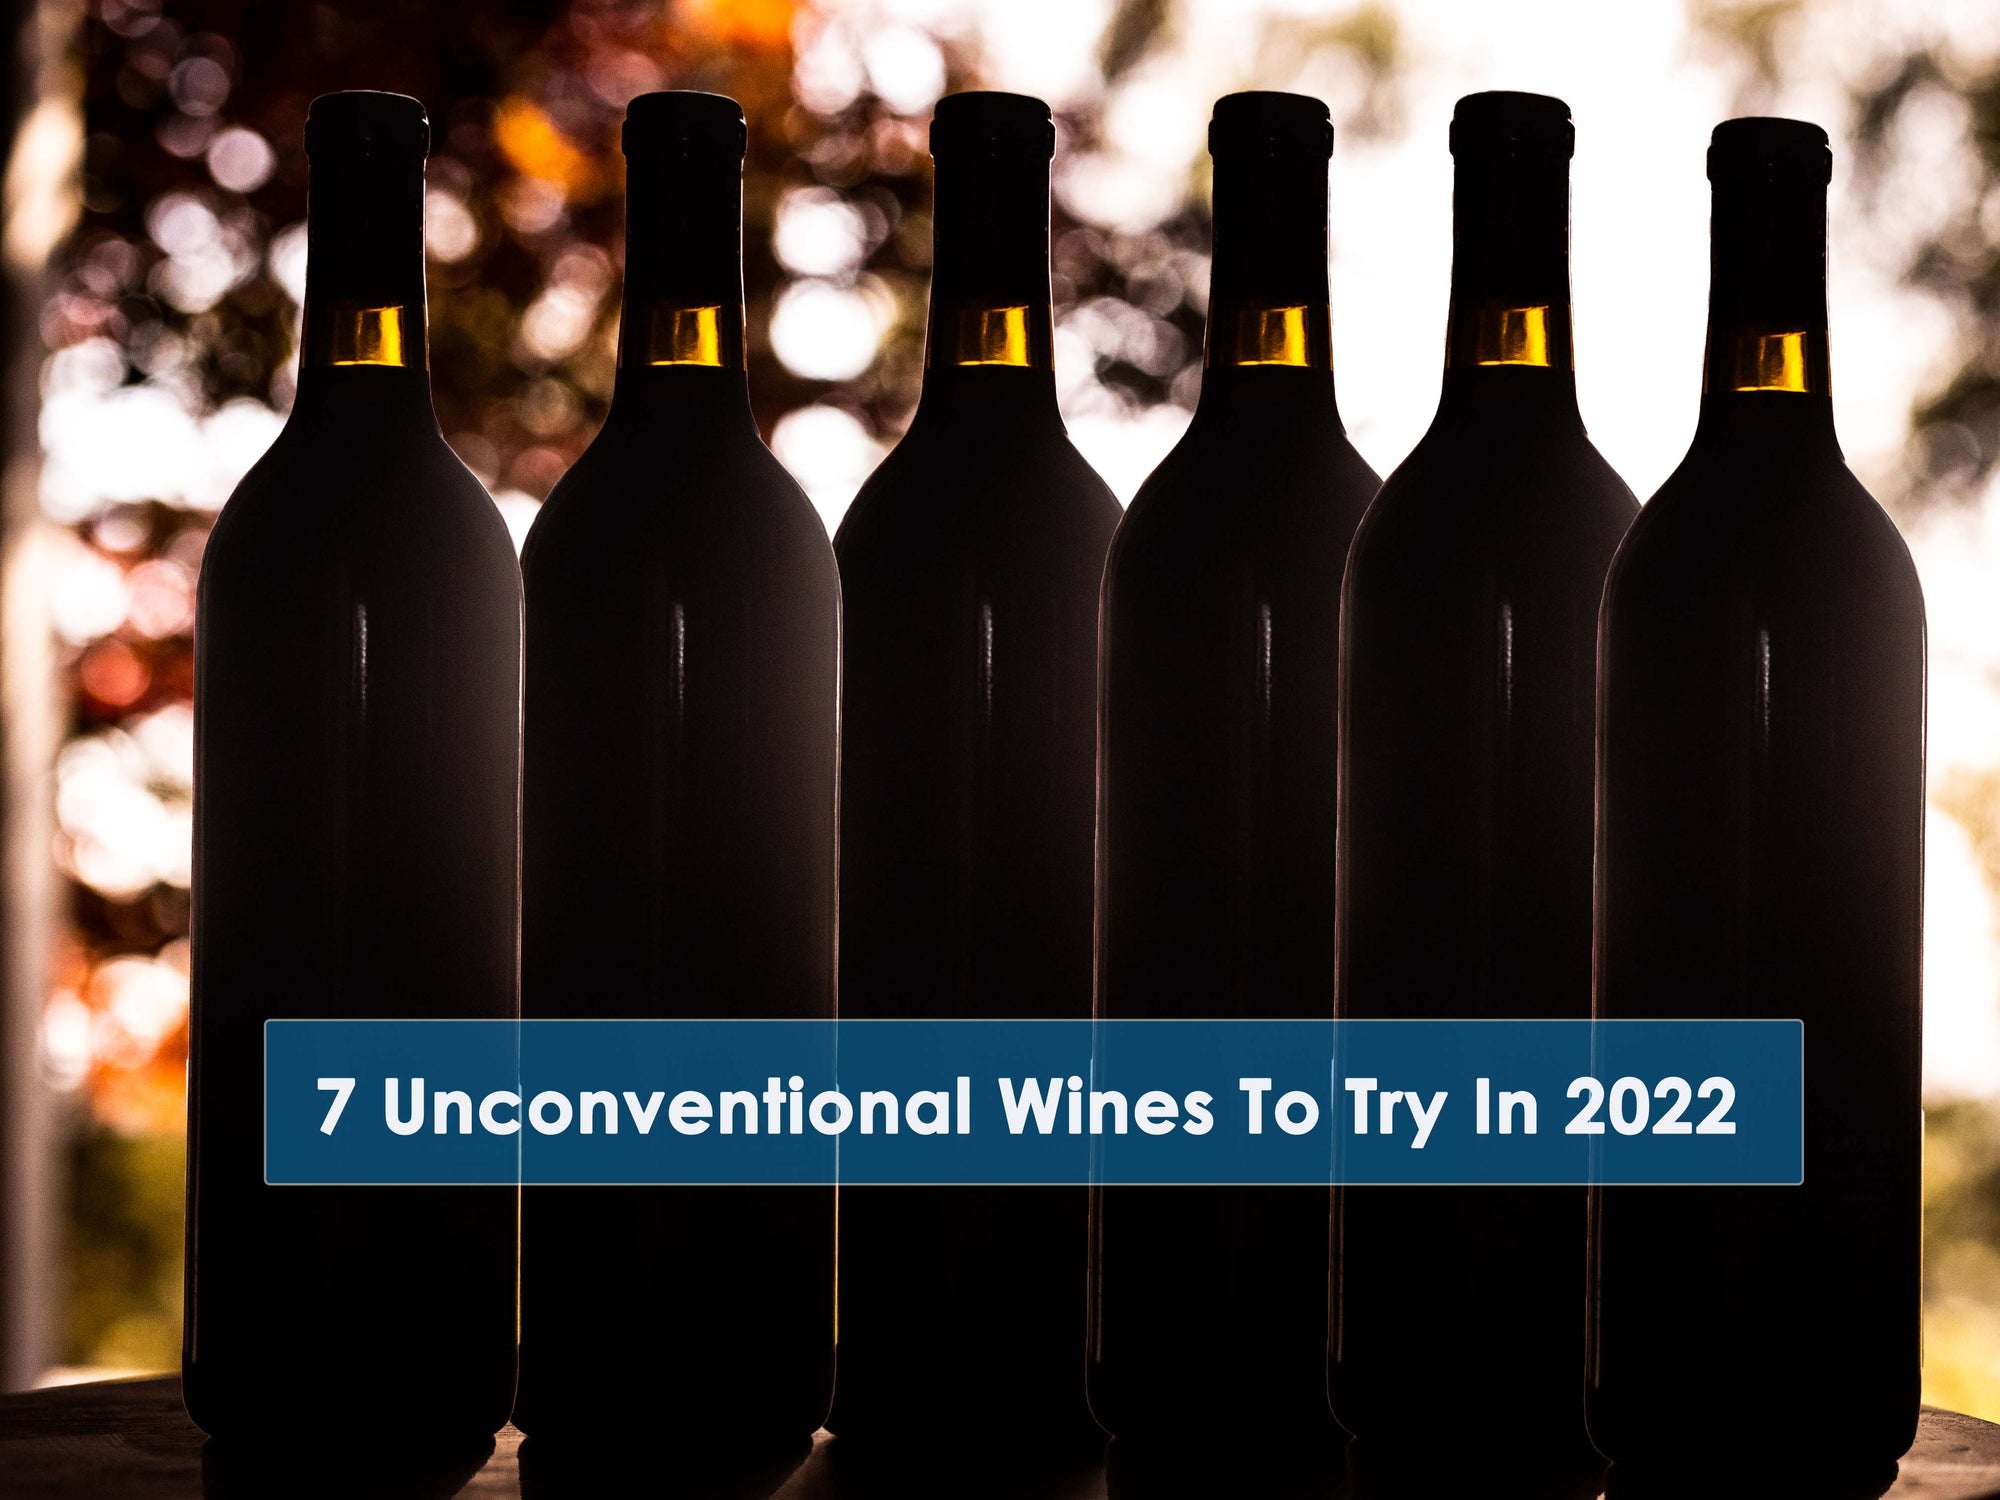 7 Unconventional California Wines to try in 2022